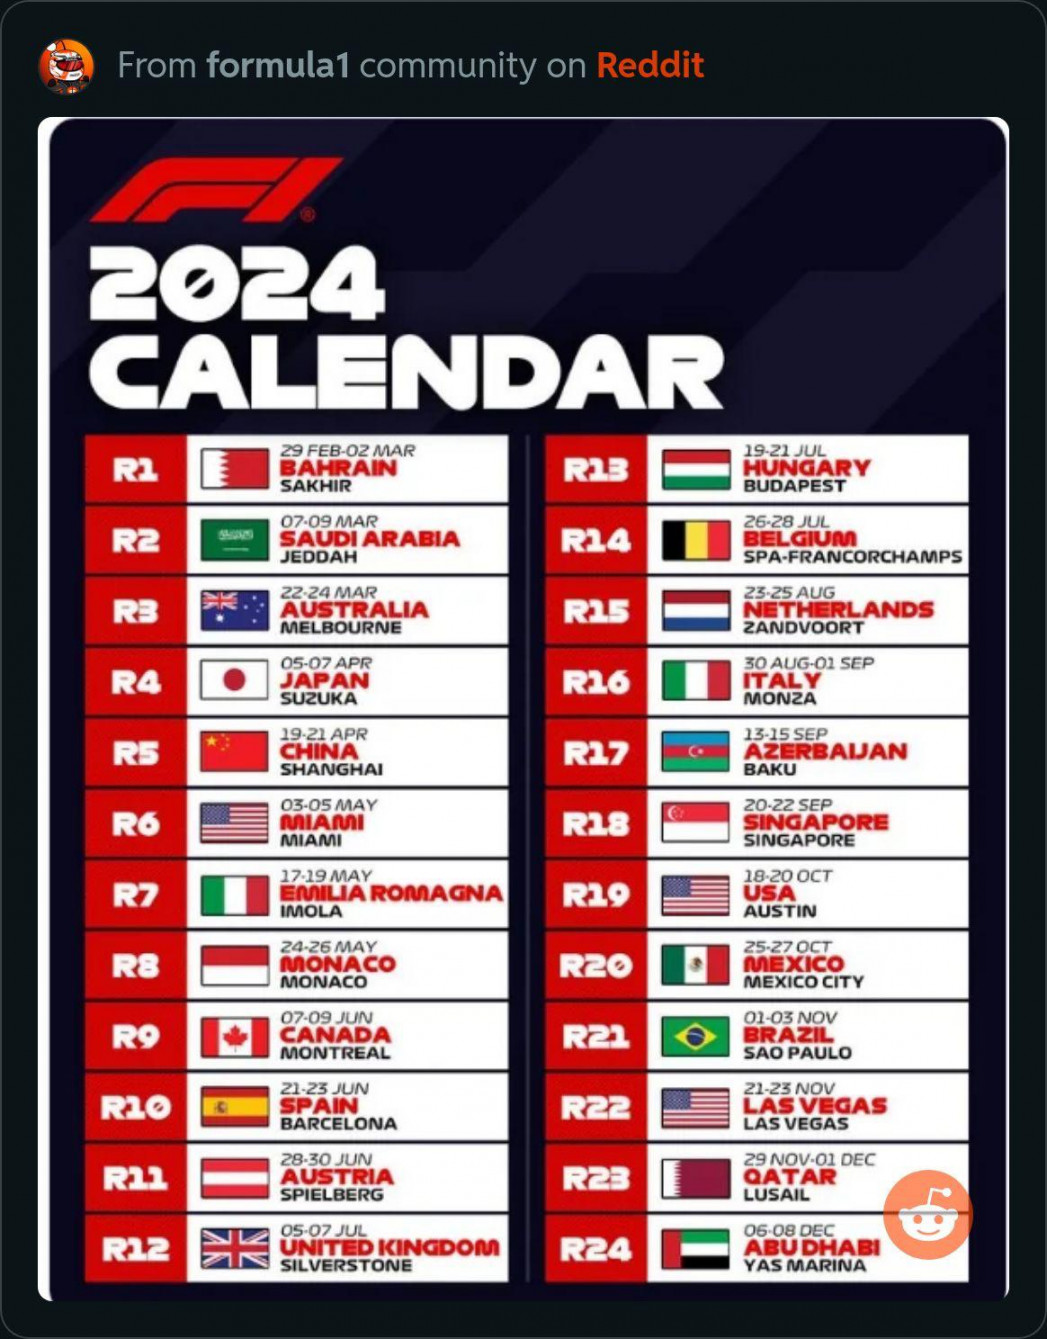 This is the track calender for next year